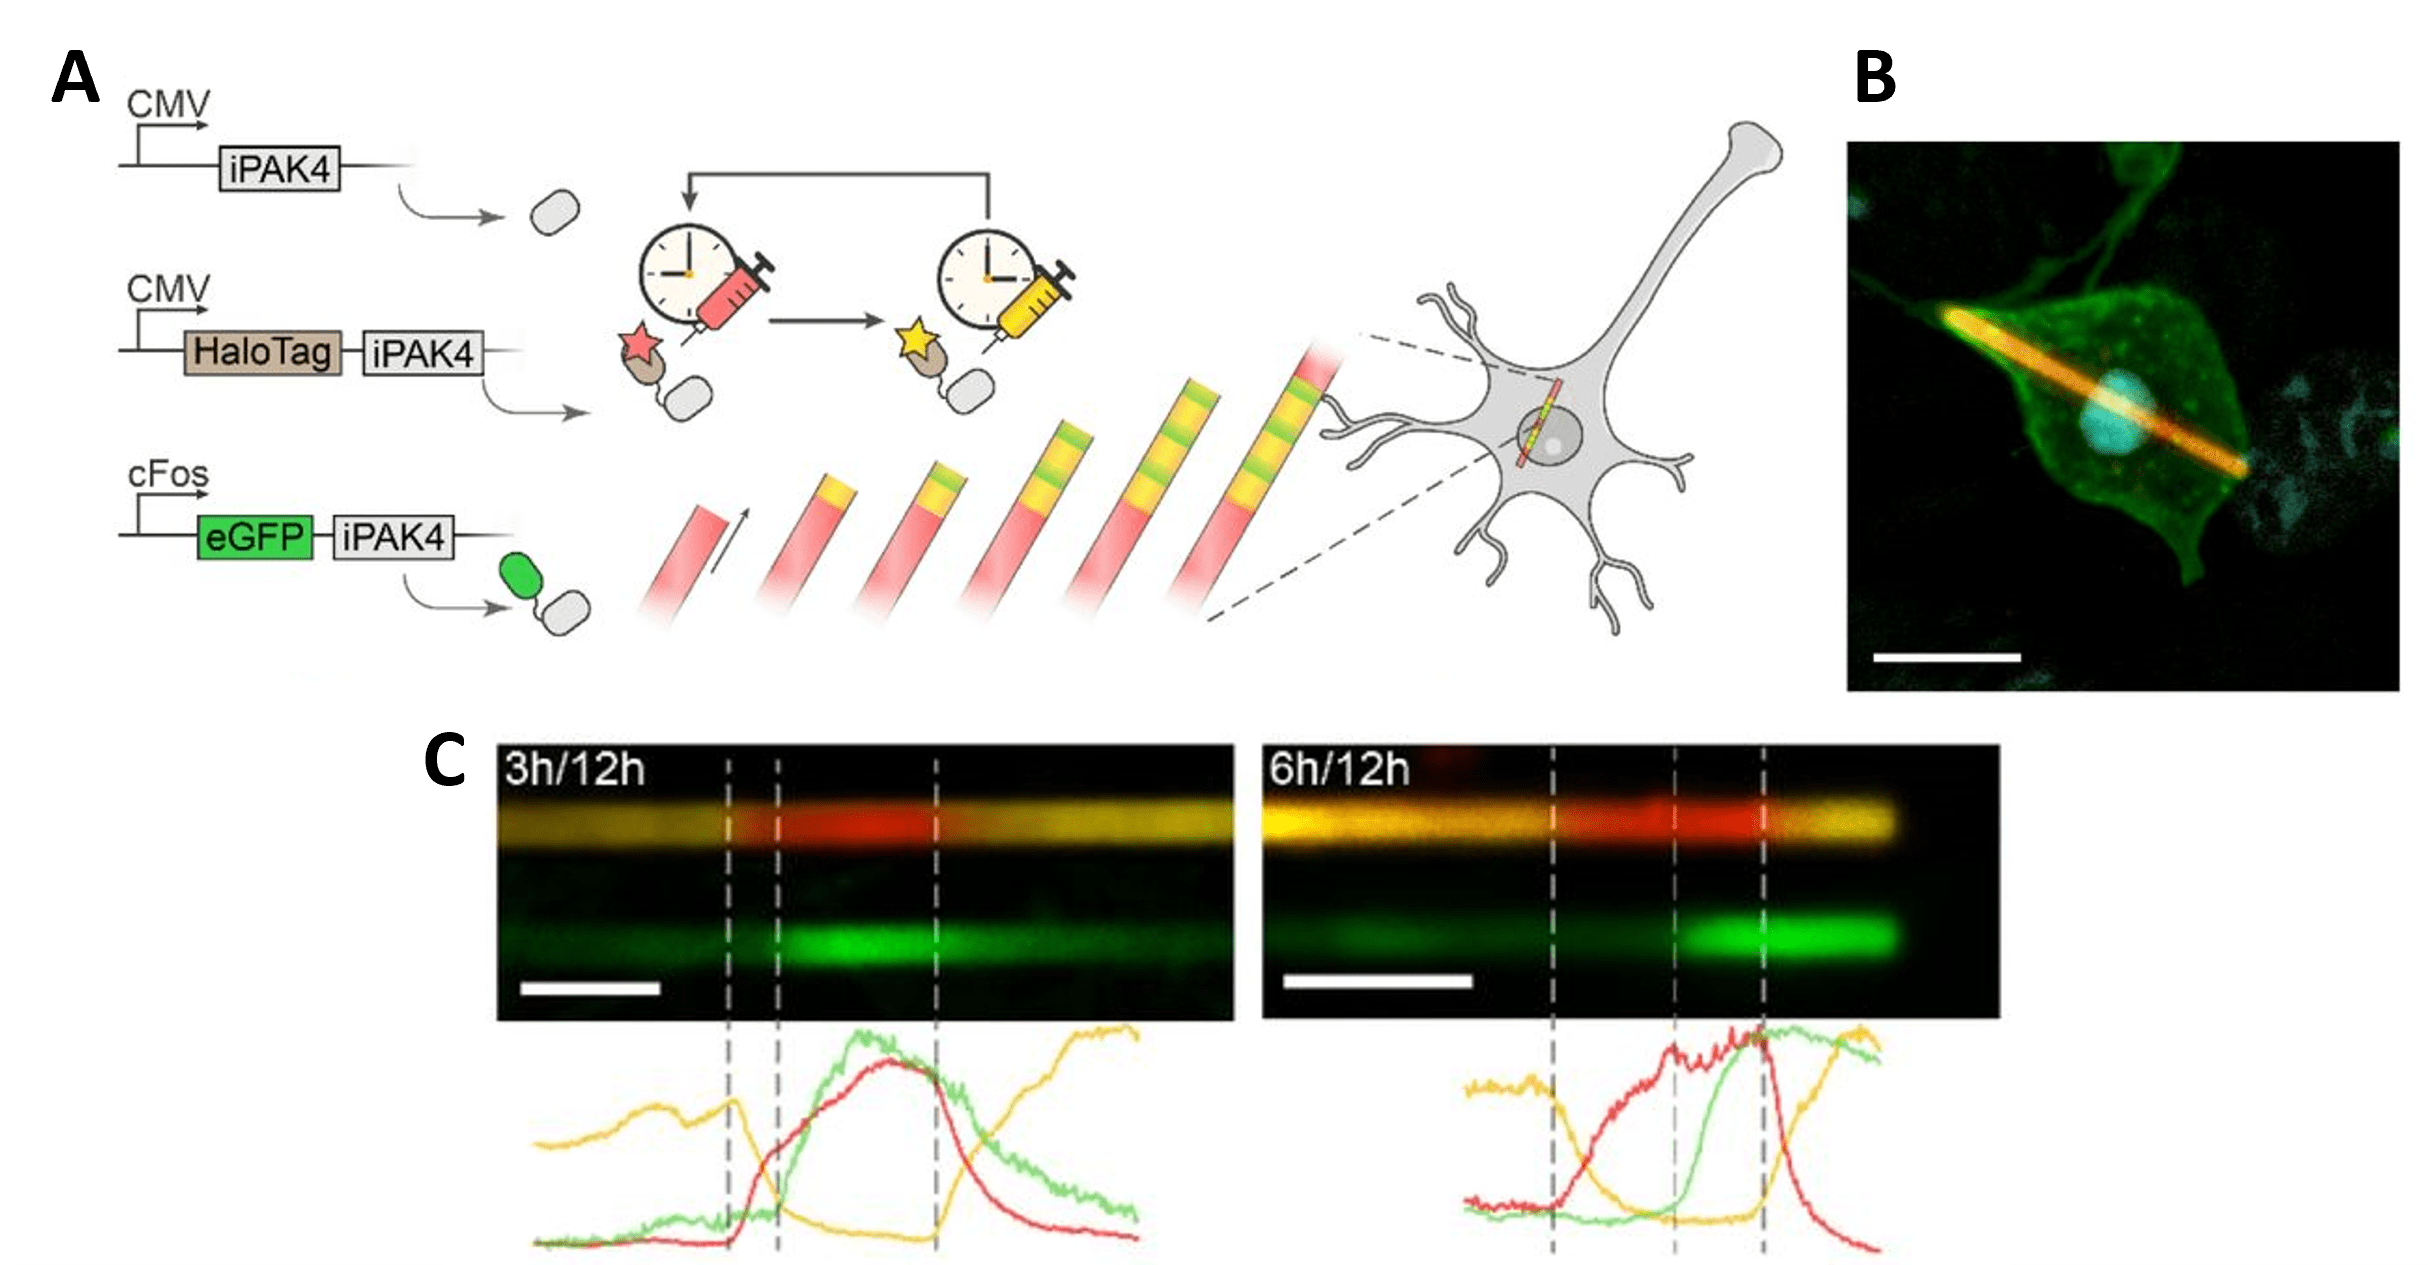  Panel A shows a schematic with three promotor/gene constructs: iPAK4 with CMV promoter, HaloTag-iPAK4 with CM promoter, and eGFP-iPAK4 with cFos promoter. HaloTag-iPAK4 proteins are shown under a cycle of clocks showing red dye injected at one time and yellow dye injected at a later time, and a timelapse illustration shows a red filament growing then a yellow section appears, and green bands appear before the filament end becomes red again. Panel B shows a micrograph of a cell with a red rod spanning the inside of its body. Panel C shows two fluorescence images of ‘ticker tape’ fibers, with the separate color channels to show the yellow-red-yellow transition and a green band appearing in the middle. The three different color intensities are plotted below, with lines marking the 3, 6, and 12 hour transition times between label color and cFos activation.